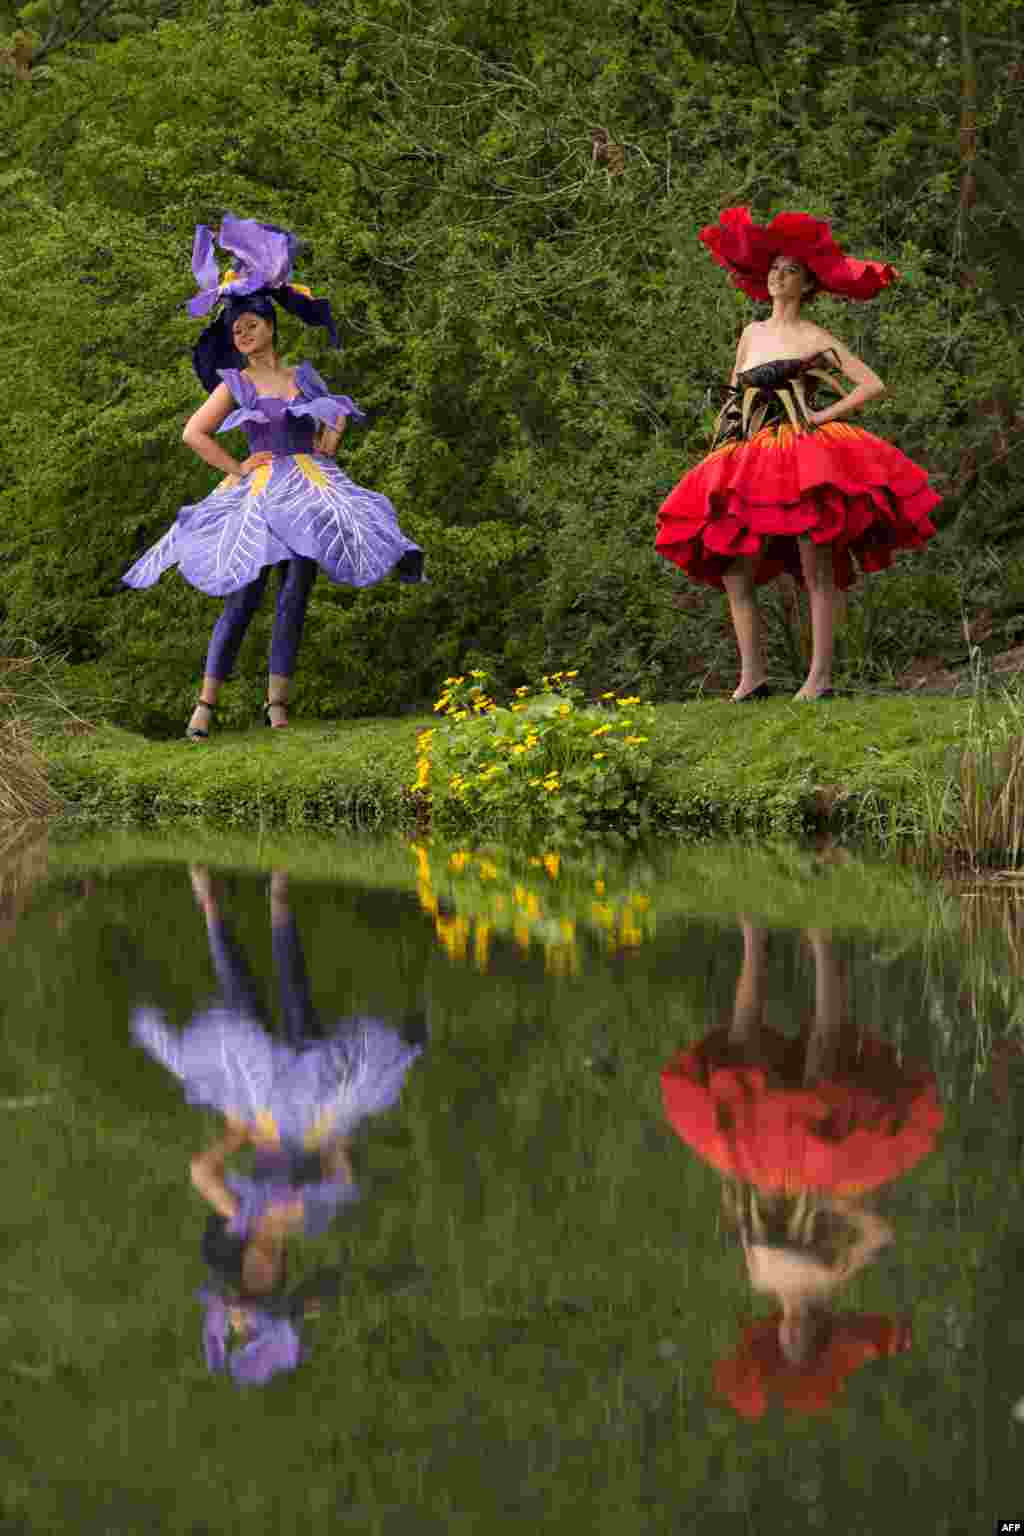 Models Lauren Green (L) and Abi Moore wear floral dress creations, representing an iris and a poppy respectively, by New Zealand artist Jenny Gillies as they pose on the eve of the opening day of the Harrogate Spring Flower Show at the Great Yorkshire Showground in Harrogate, northern England. The flower show features over 1,000 exhibitors and hosts the UK&#39;s biggest exhibition by flower arrangers and florists.